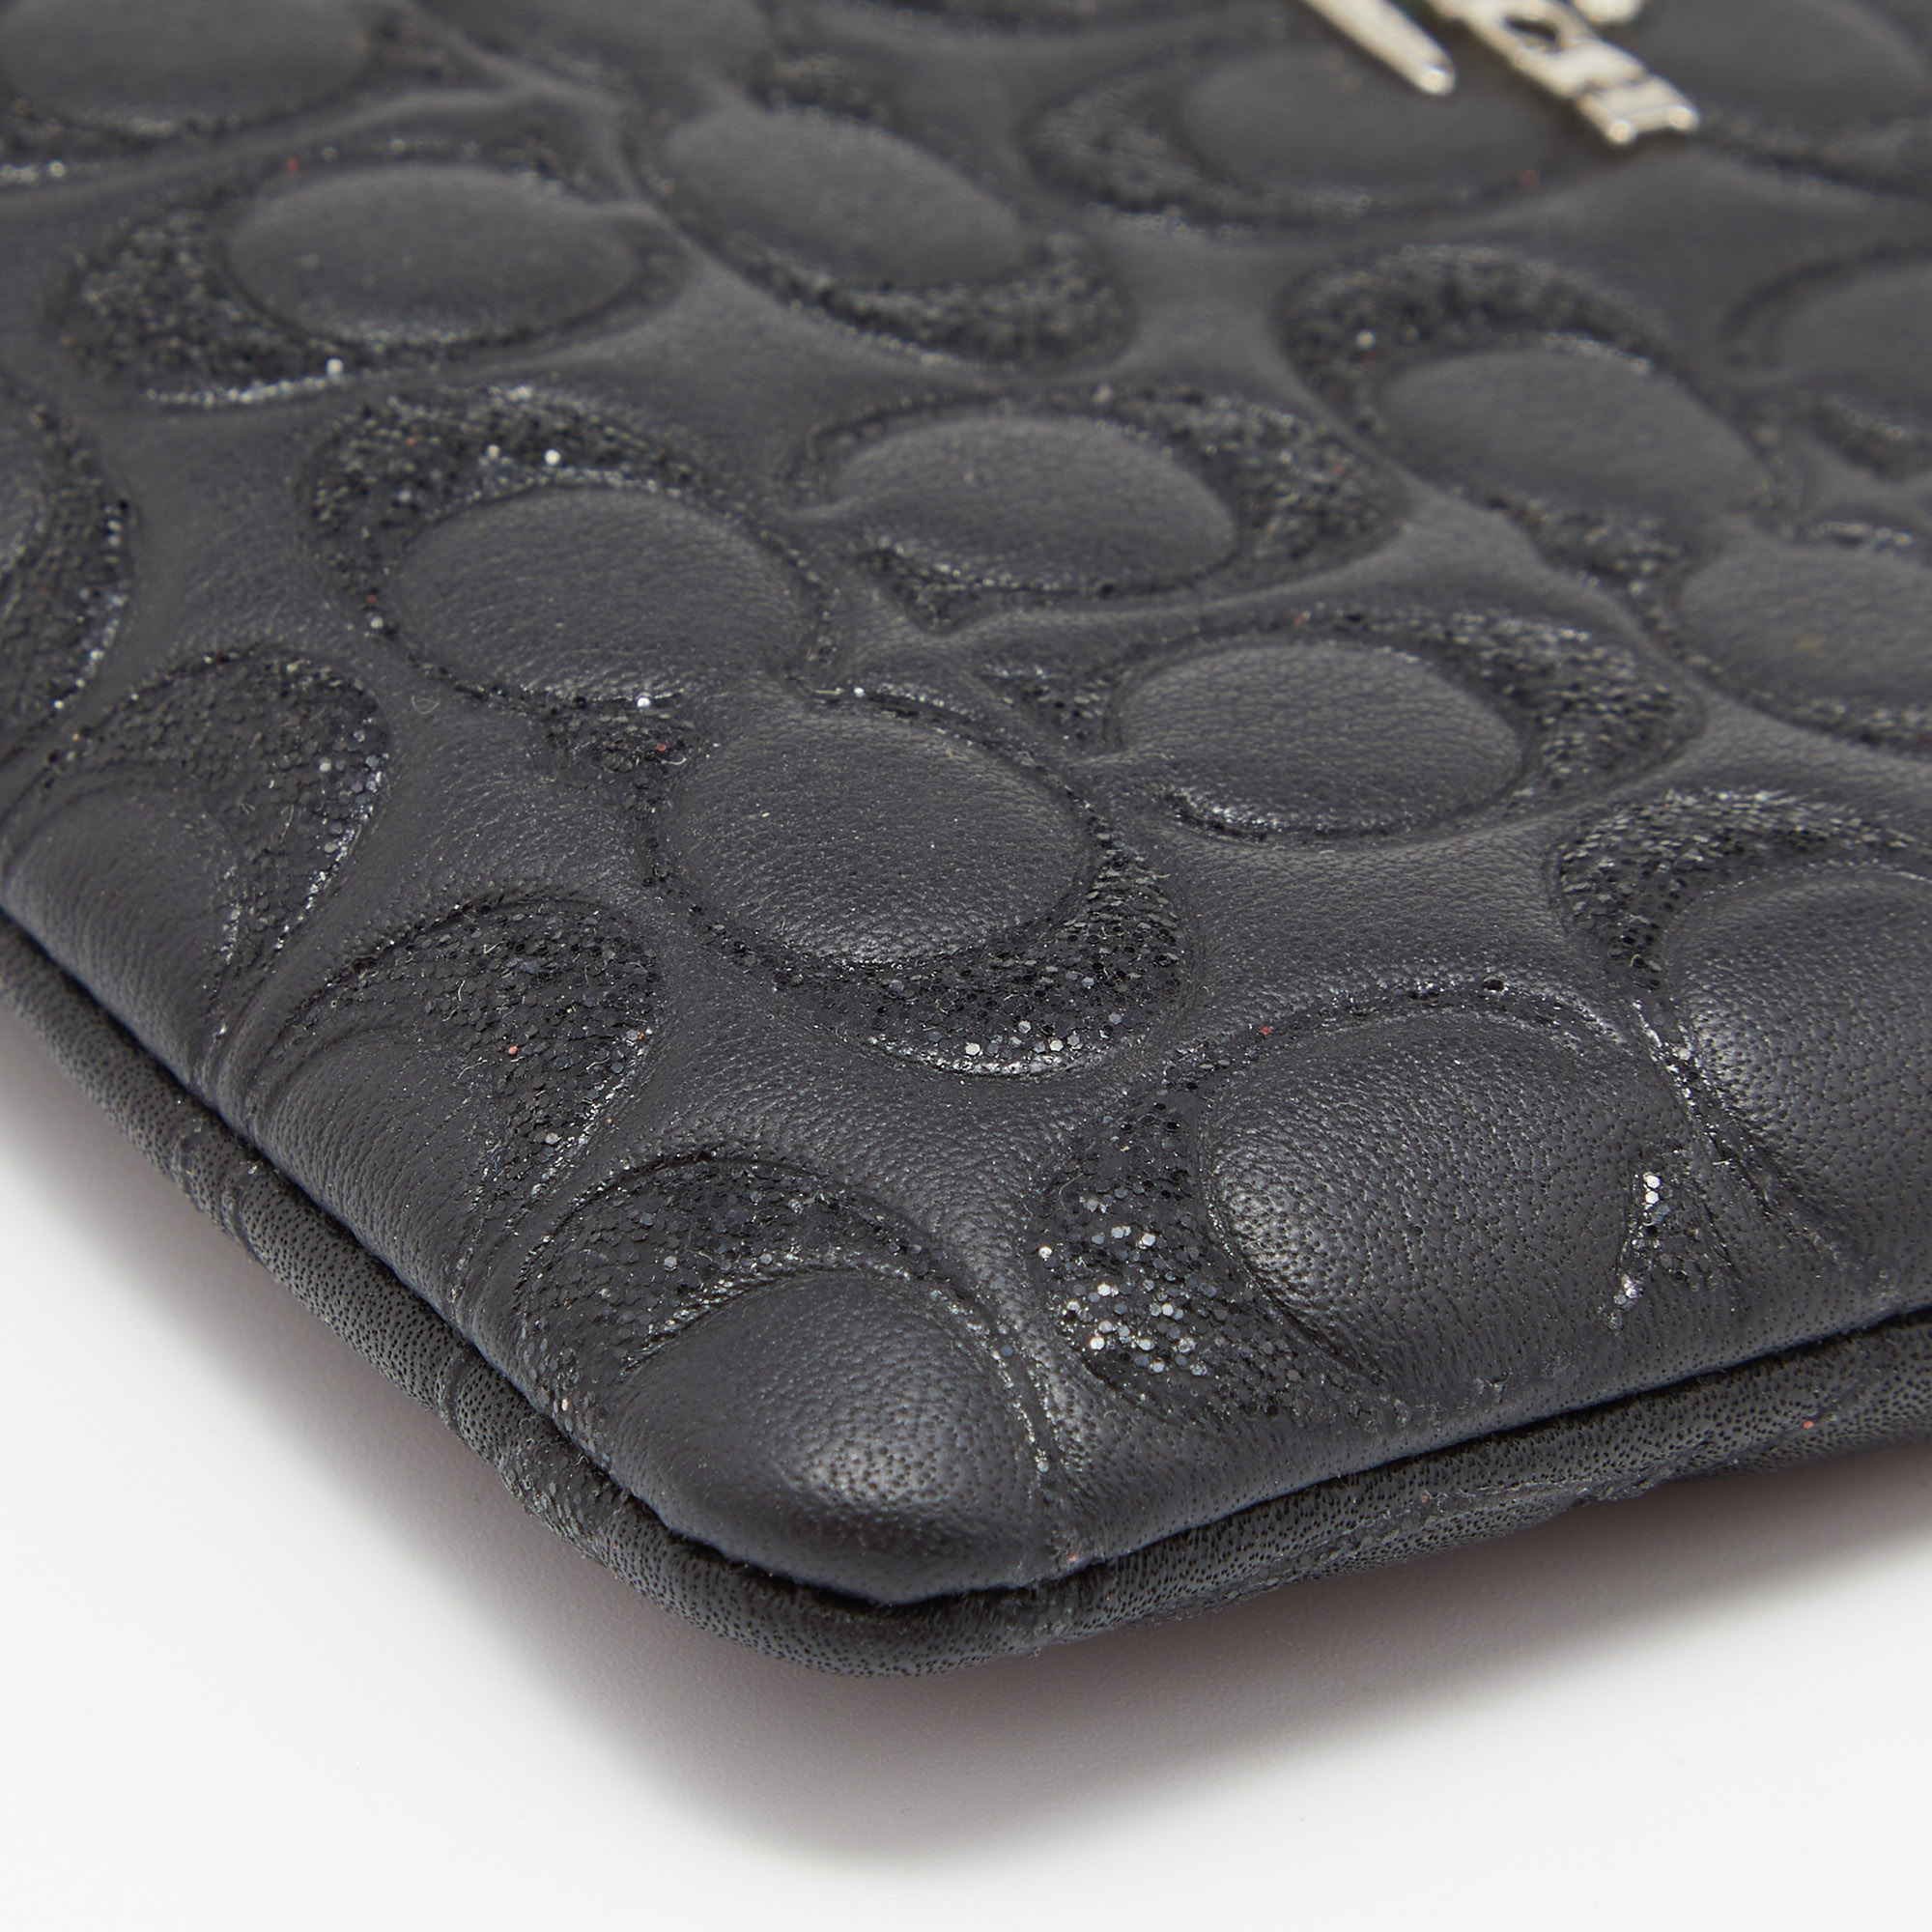 Coach Black Embossed Leather Wristlet Clutch